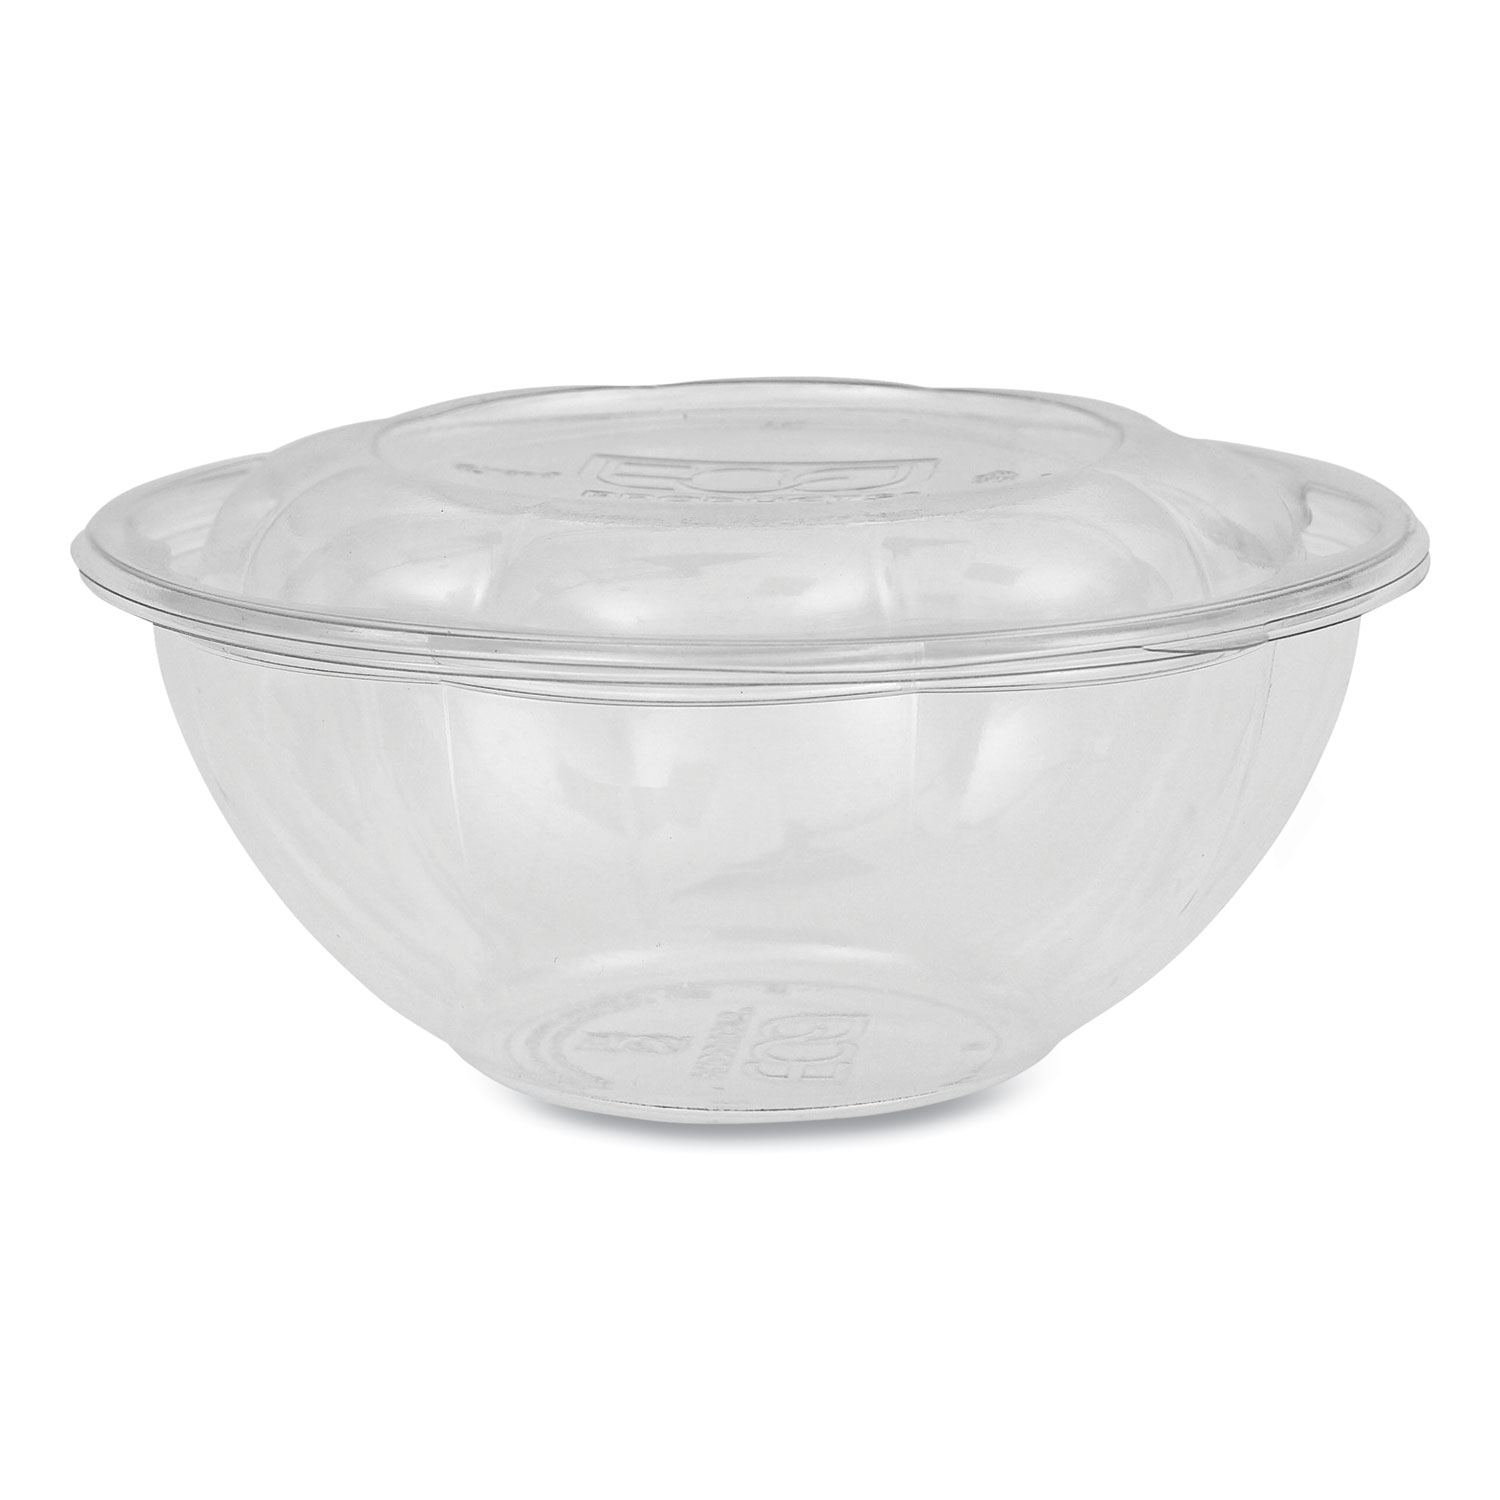 Basic Nature 24 oz Round Clear PLA Plastic To Go Bowl - Compostable - 7 x  7 x 2 1/4 - 500 count box